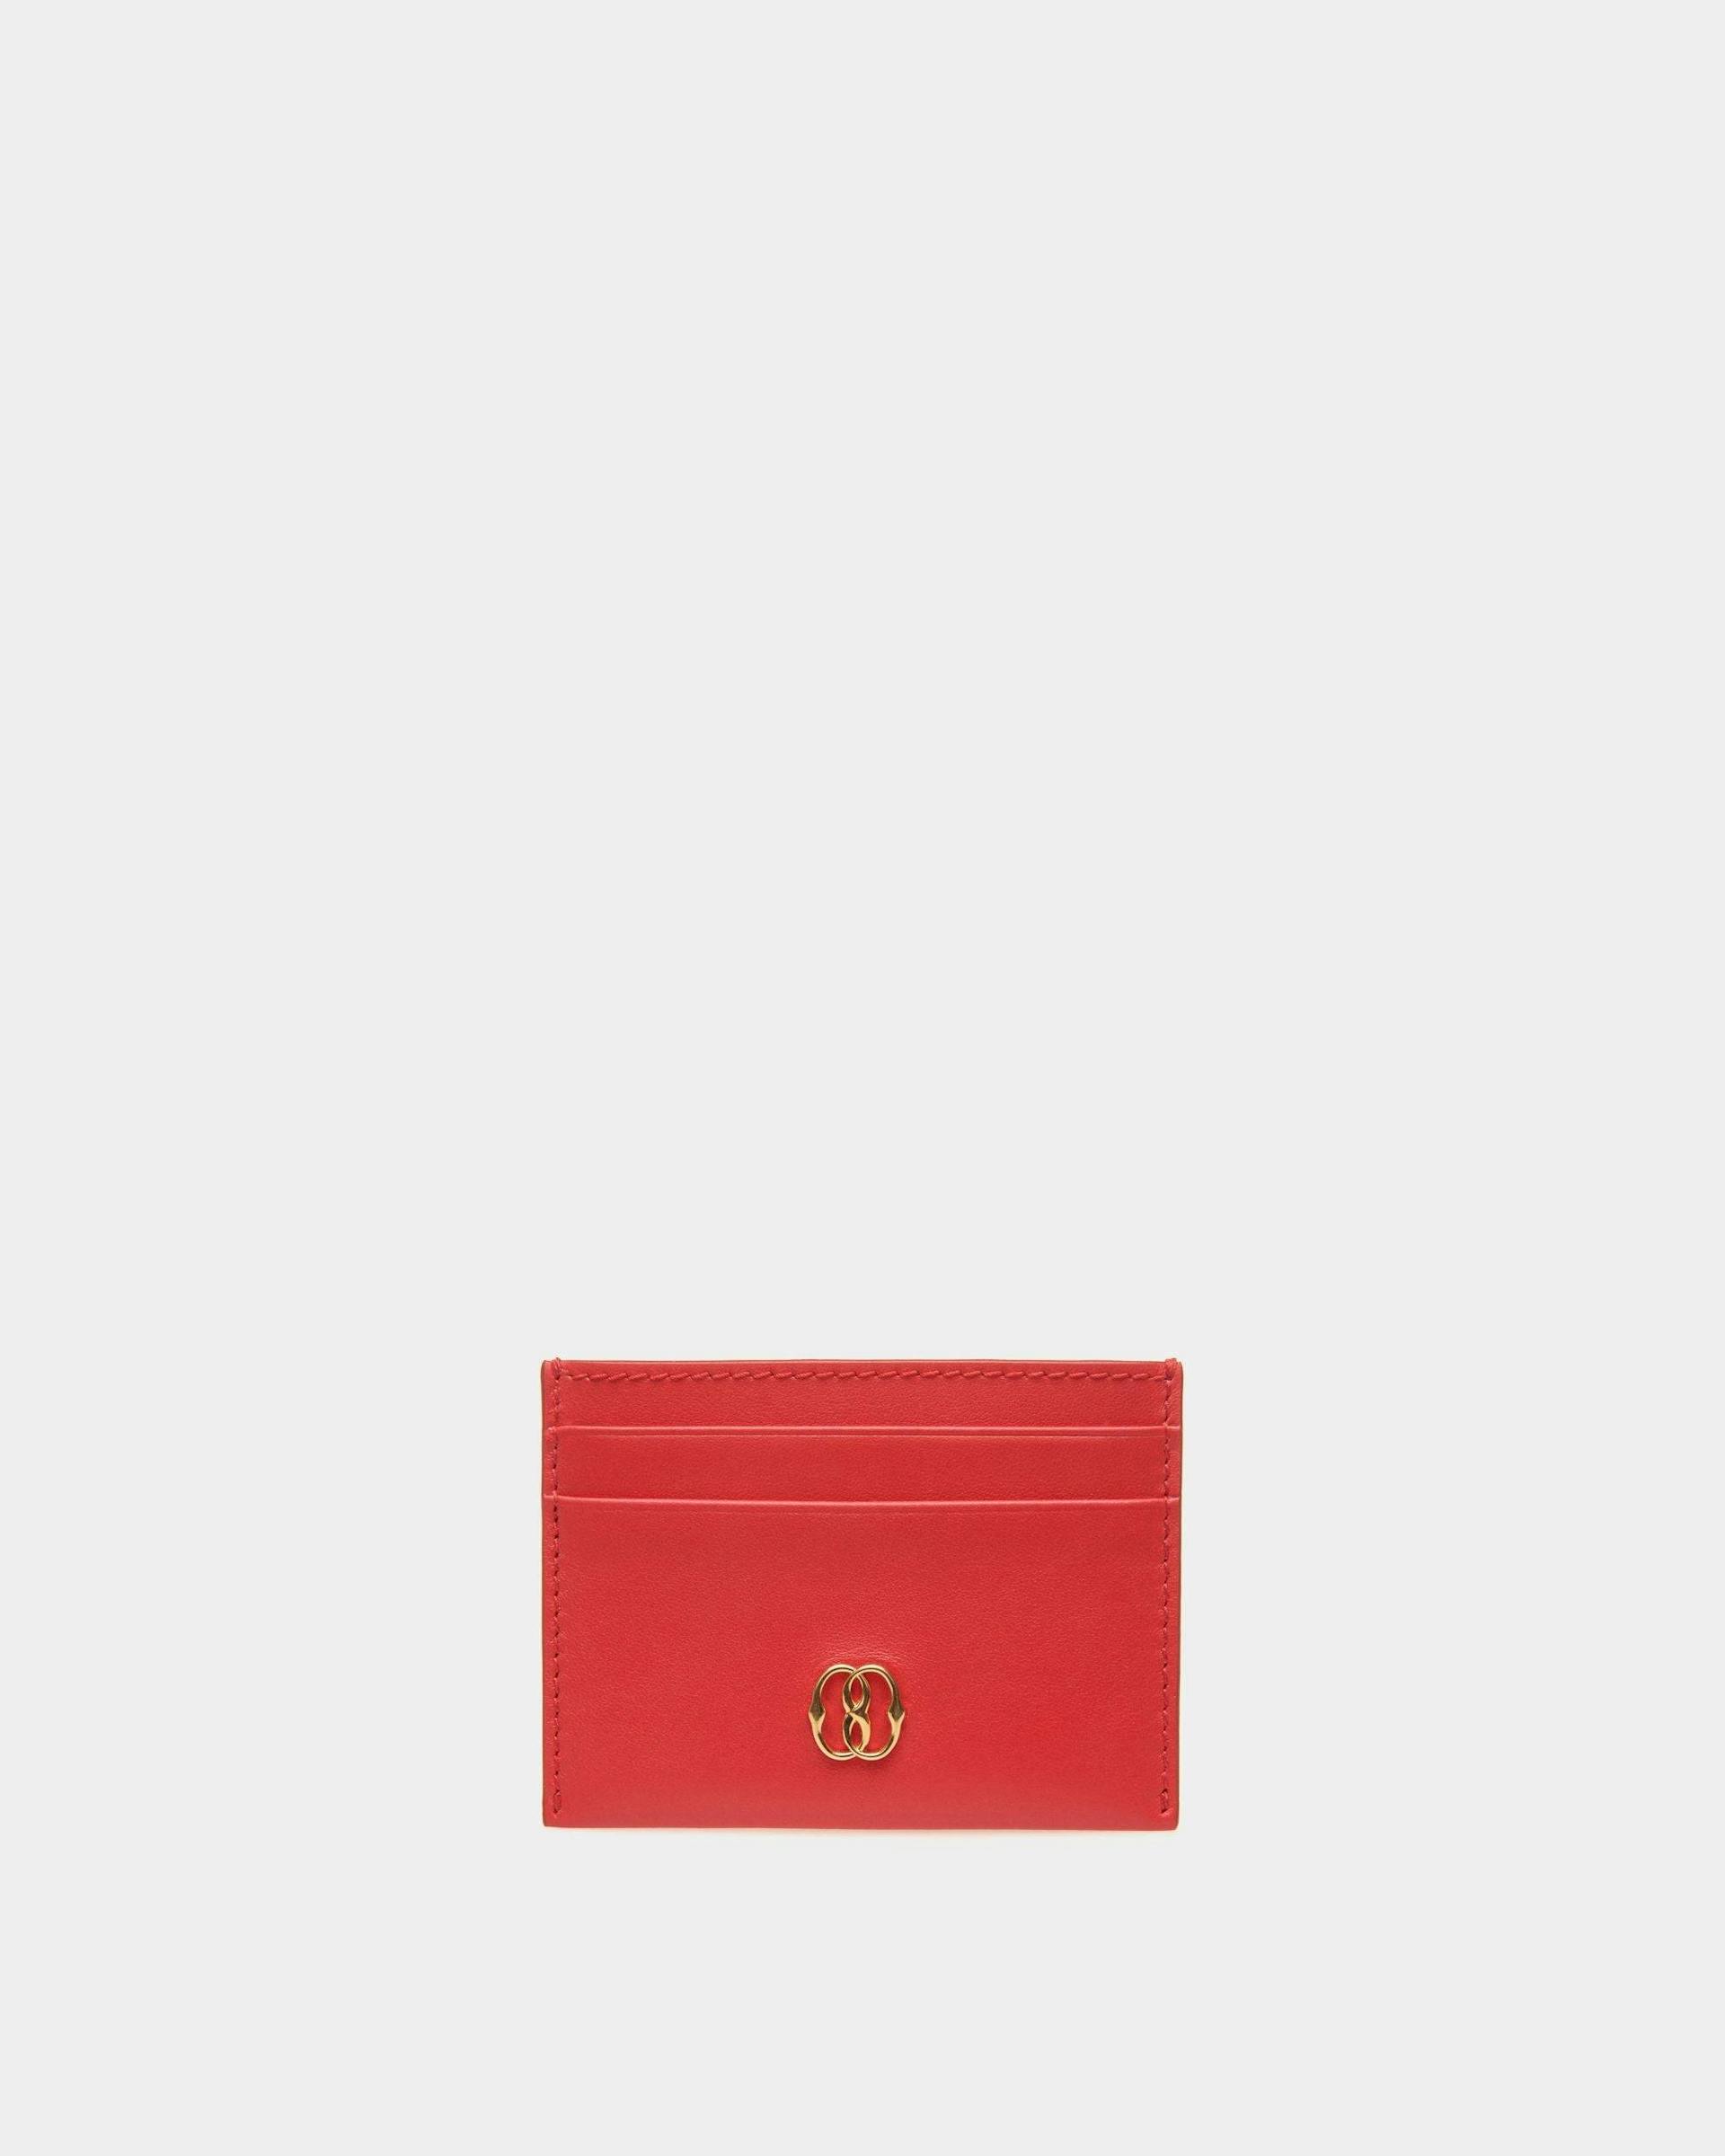 Women's Emblem Card Holder in Red Leather | Bally | Still Life Front